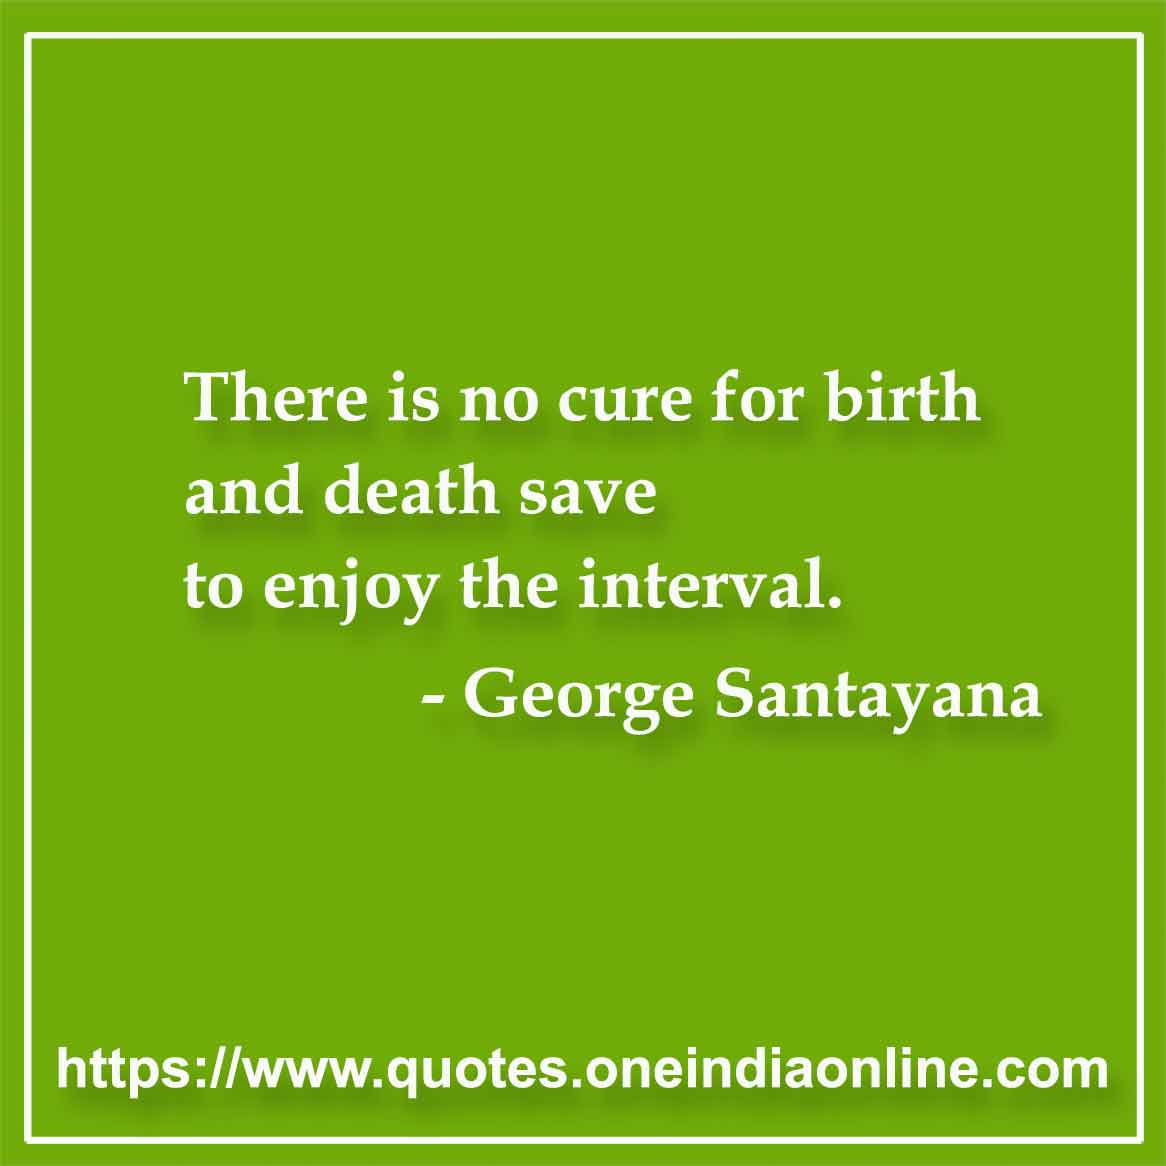 There is no cure for birth and death save to enjoy the interval.

- George Santayana Quotes